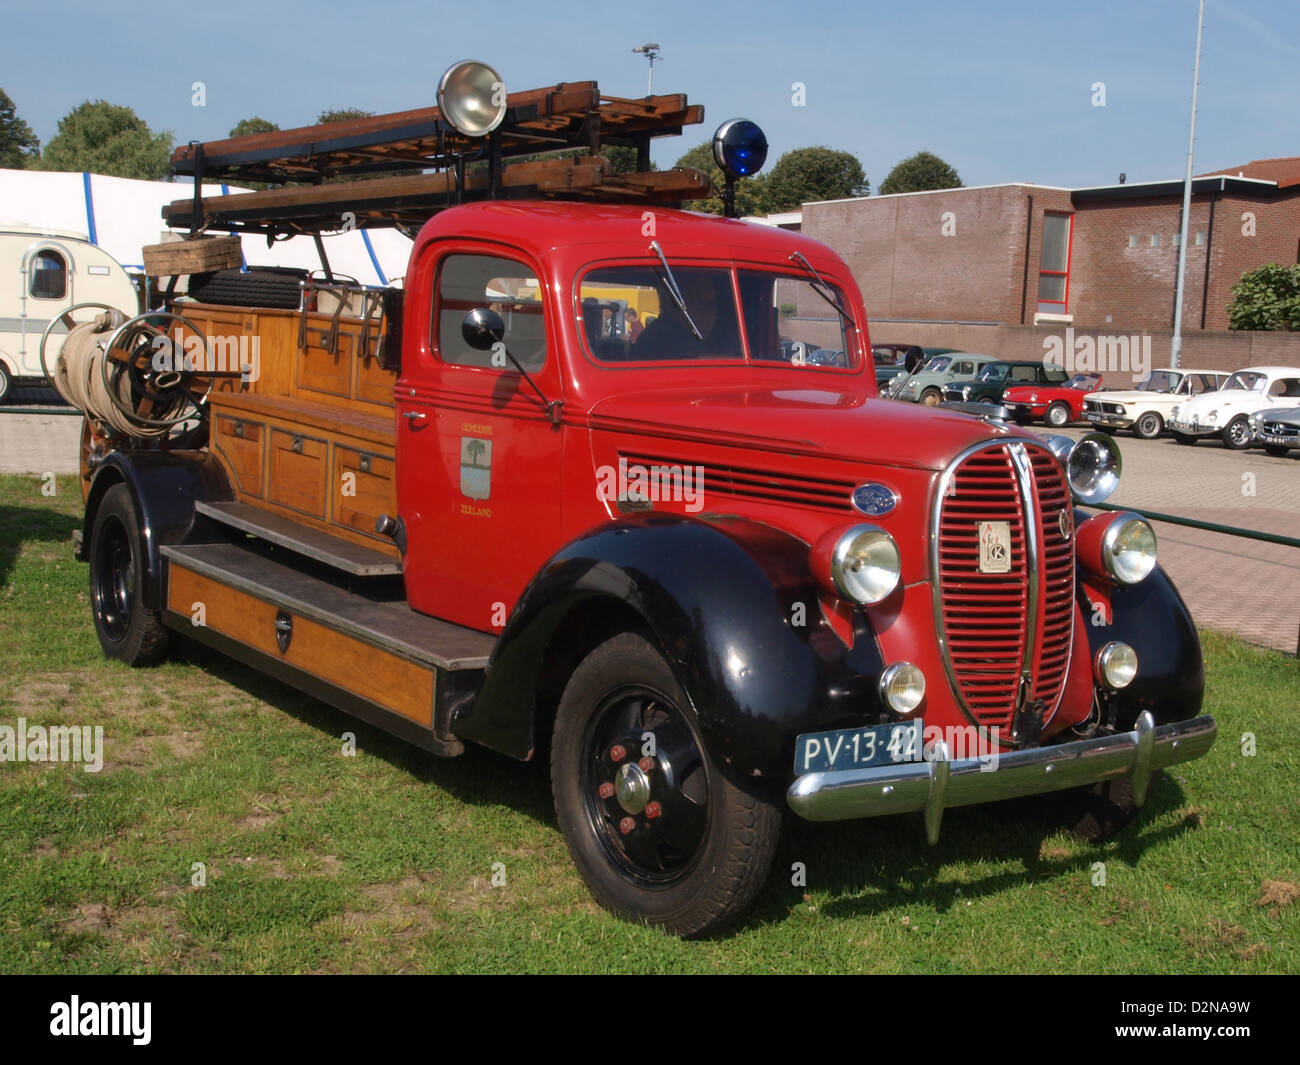 1956 Ford Fire engine Stock Photo